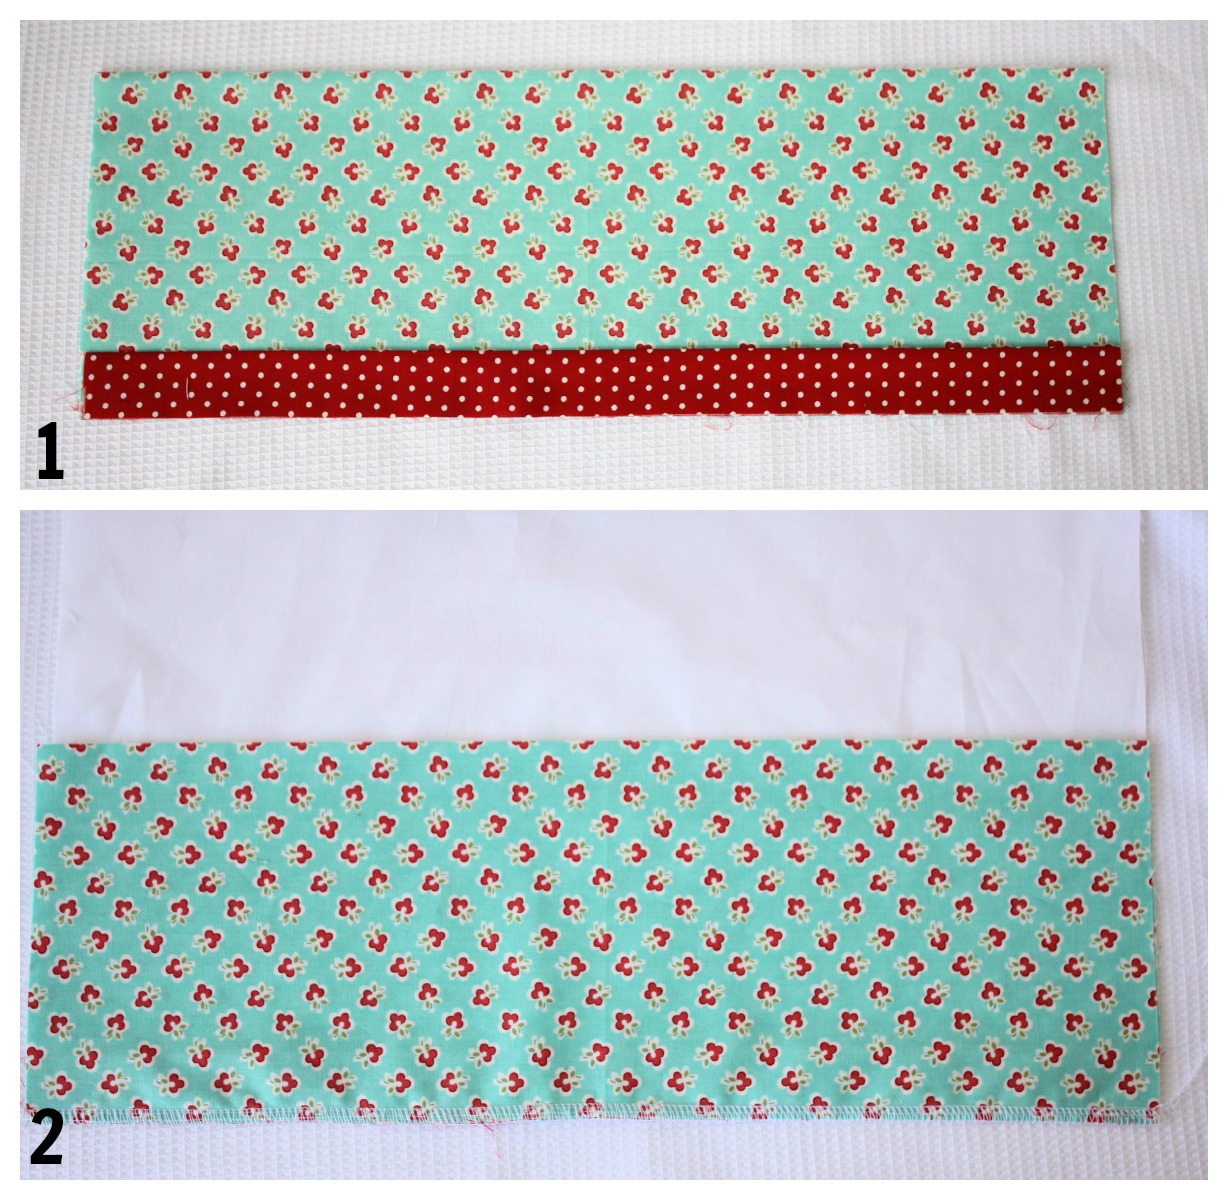 How to Make a Pillowcase – Pillowcase Pattern in 3 Sizes 